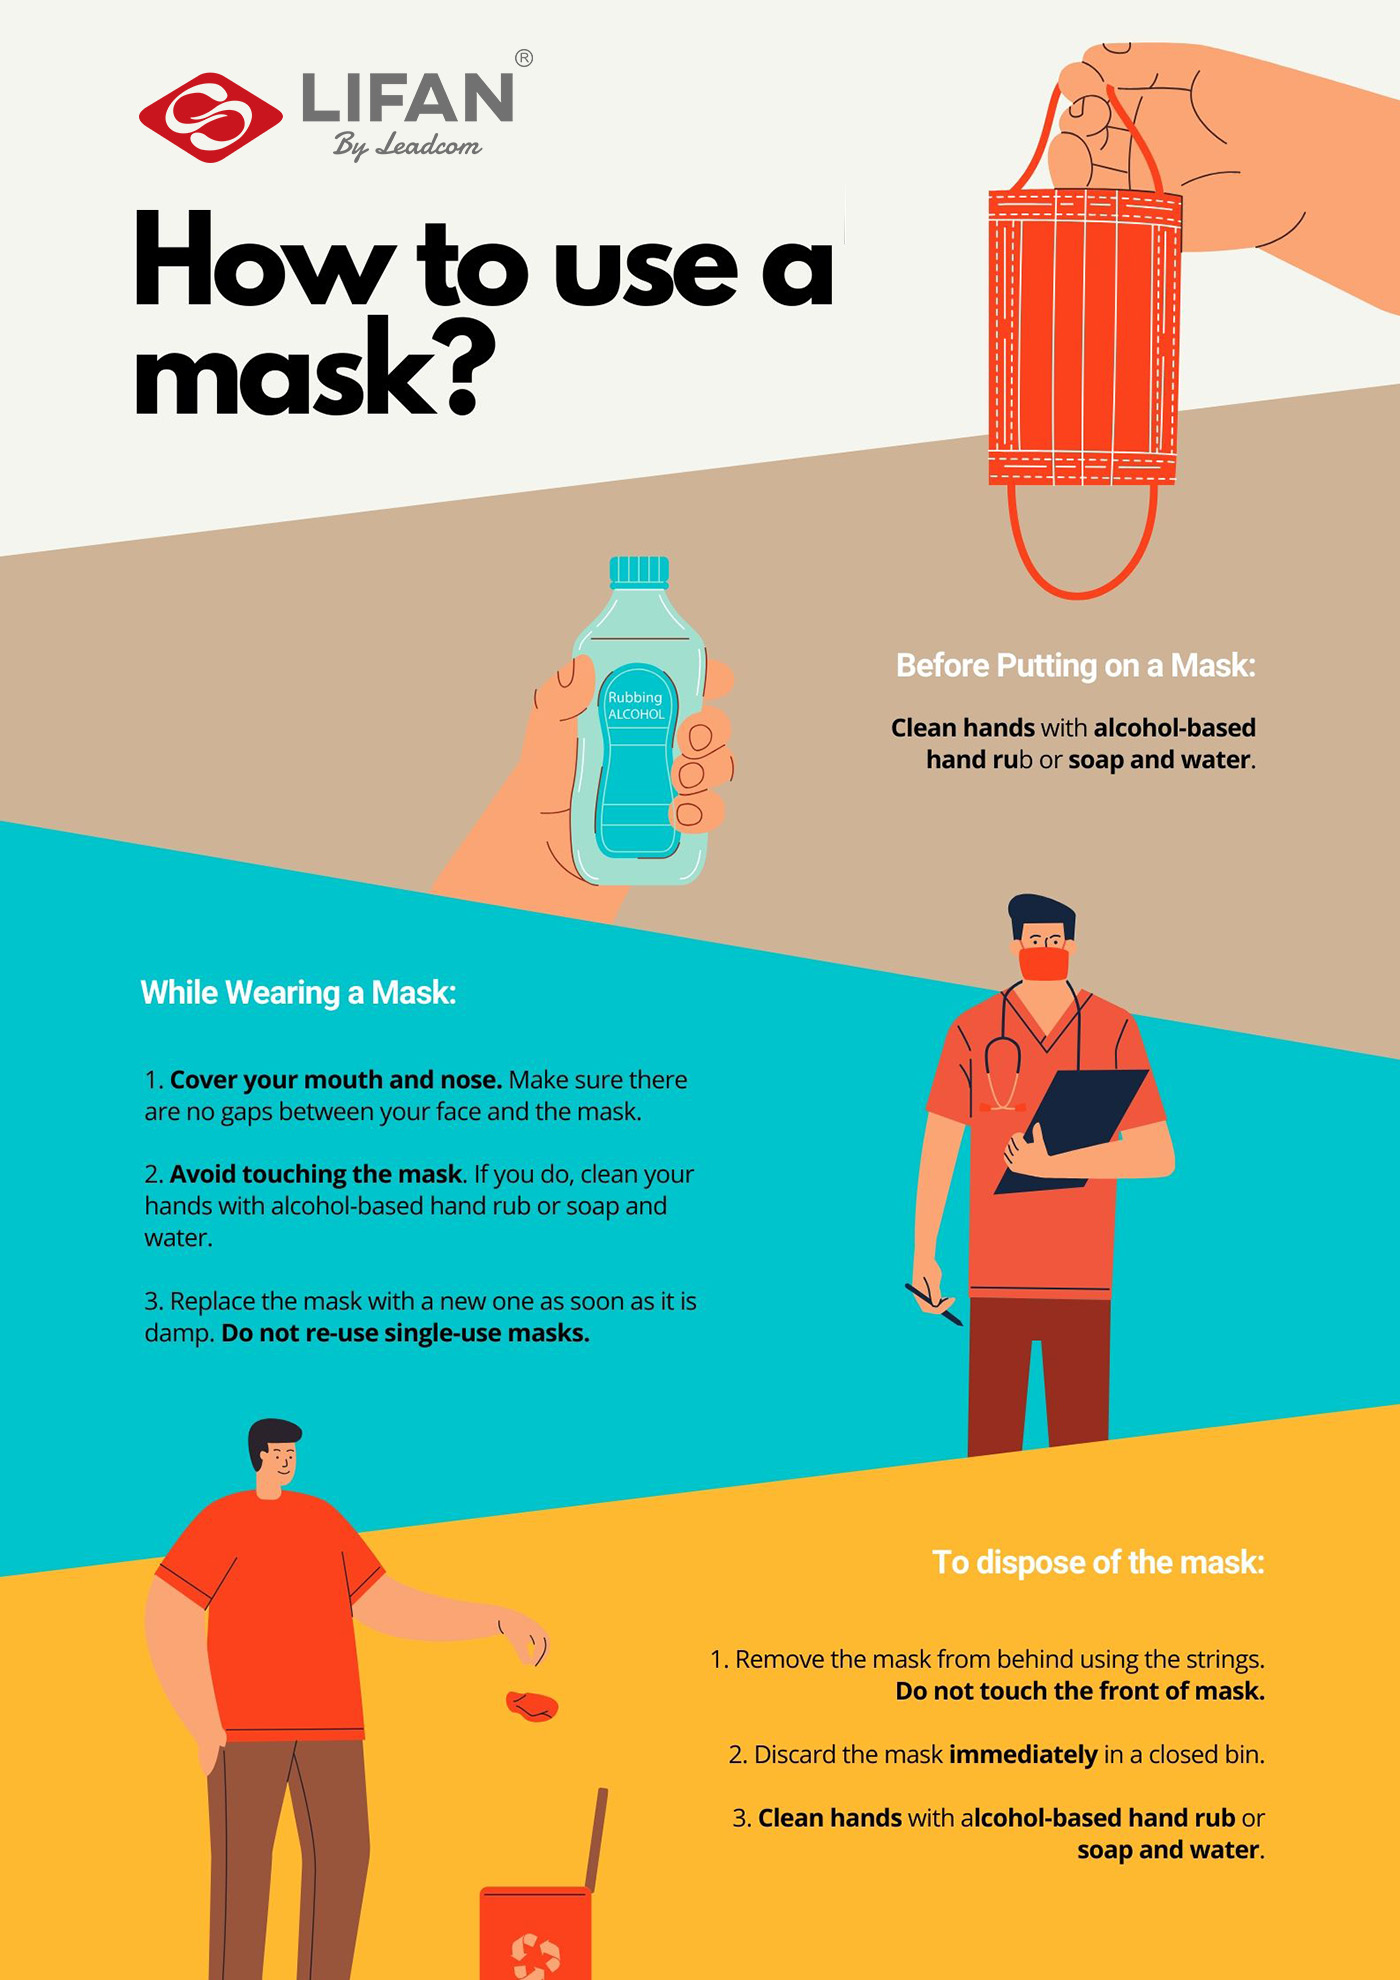 face mask lifan - How to use a mask during COVID-19 epidemic